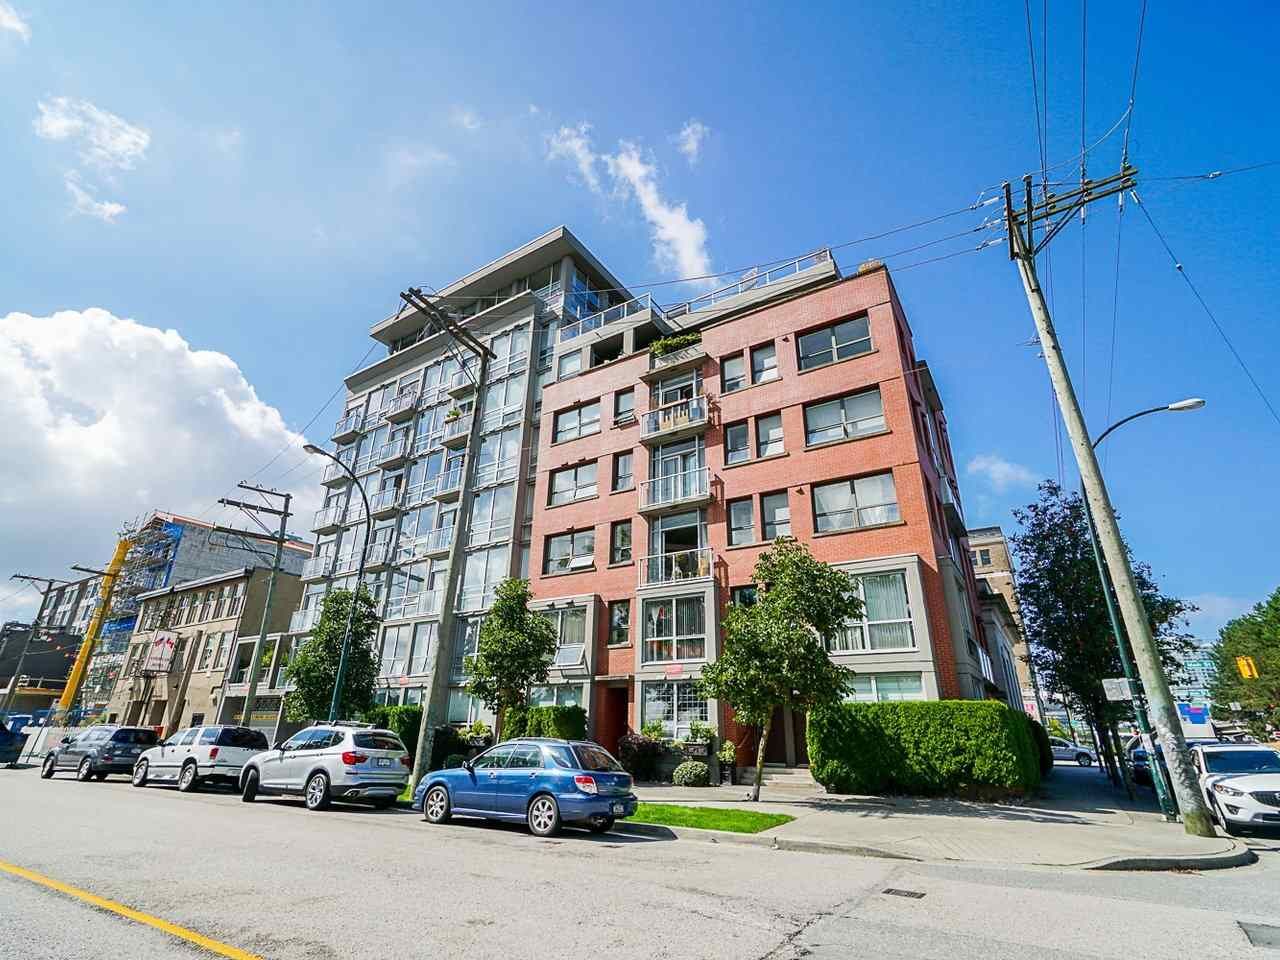 Main Photo: 508 919 STATION Street in Vancouver: Strathcona Condo for sale (Vancouver East)  : MLS®# R2489831